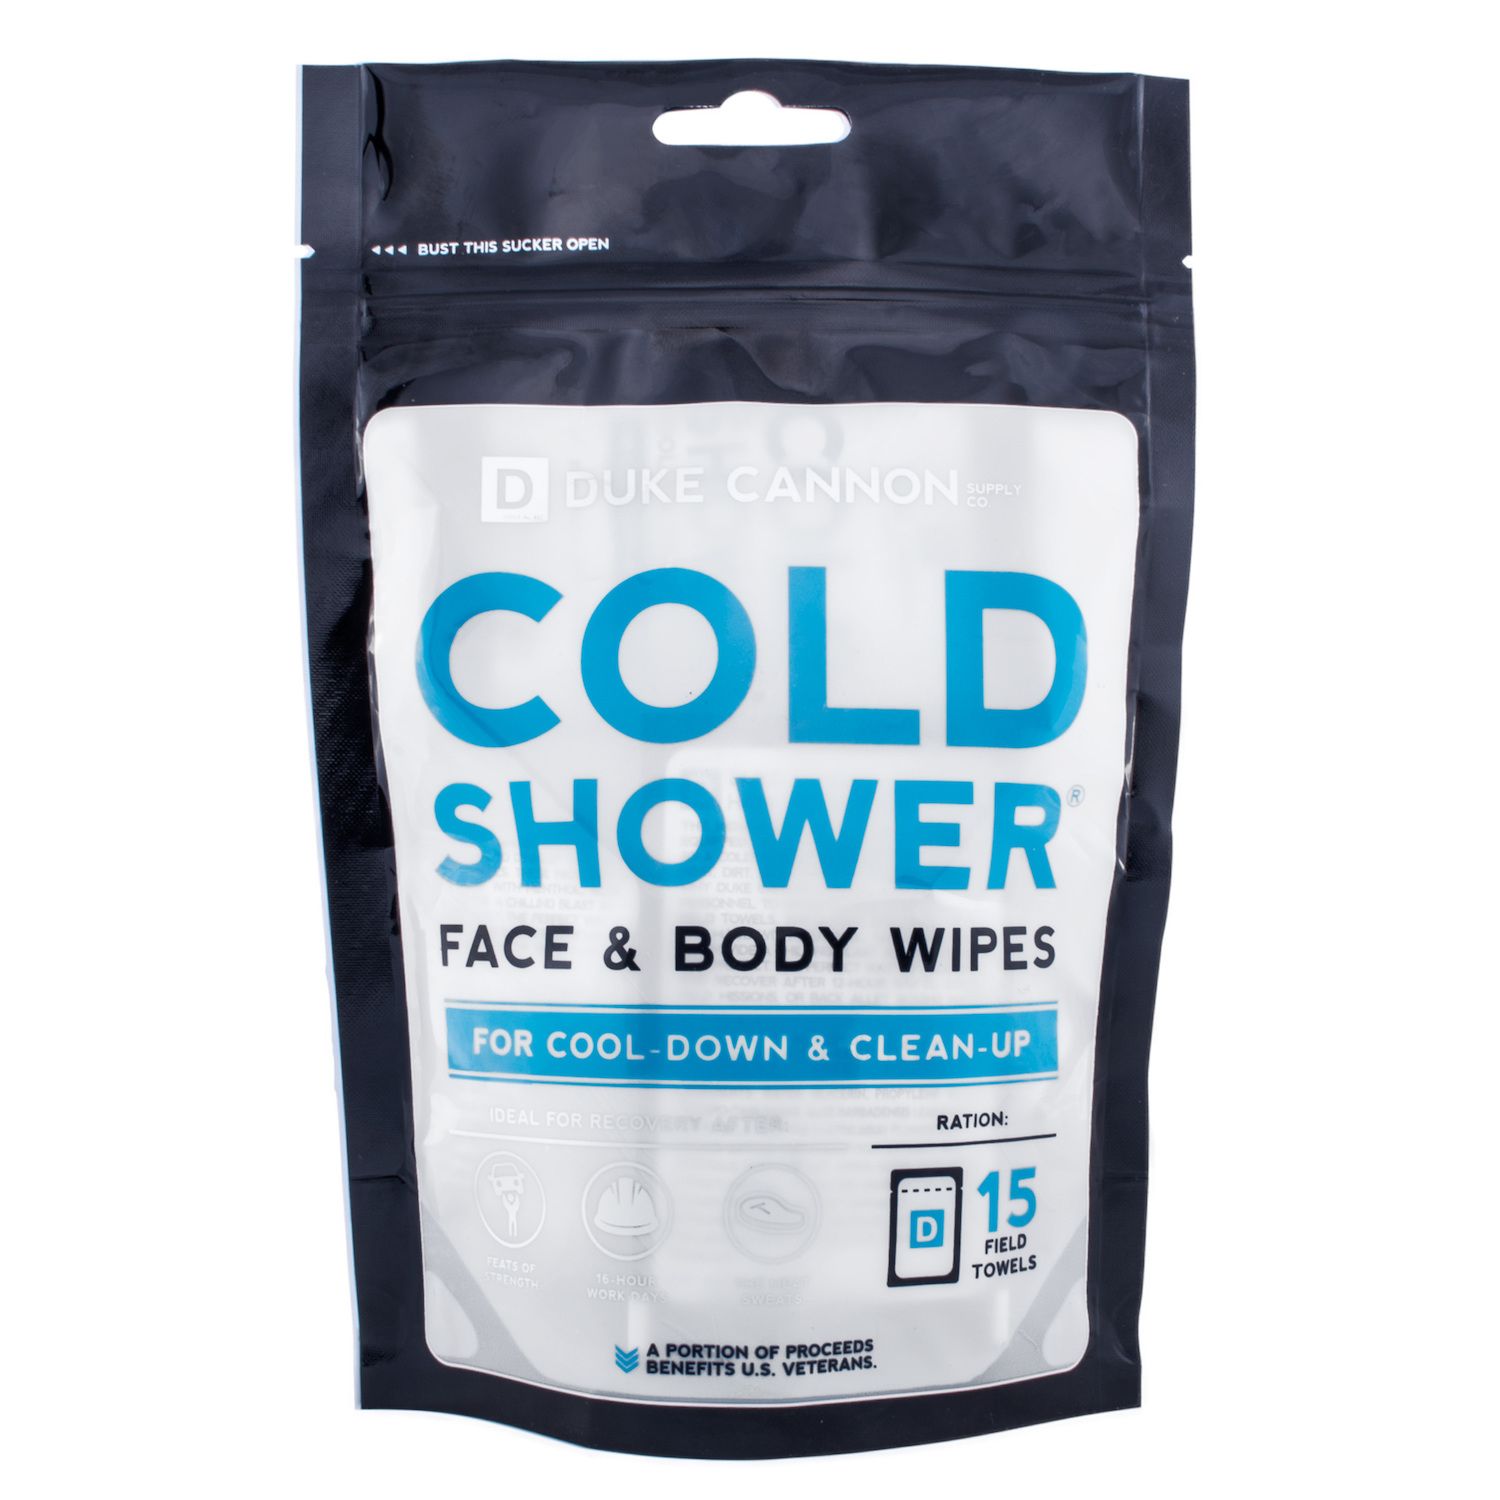 Image for Duke Cannon Supply Co. Cold-Shower Cooling Field Towels Multipack Pouch at Kohl's.